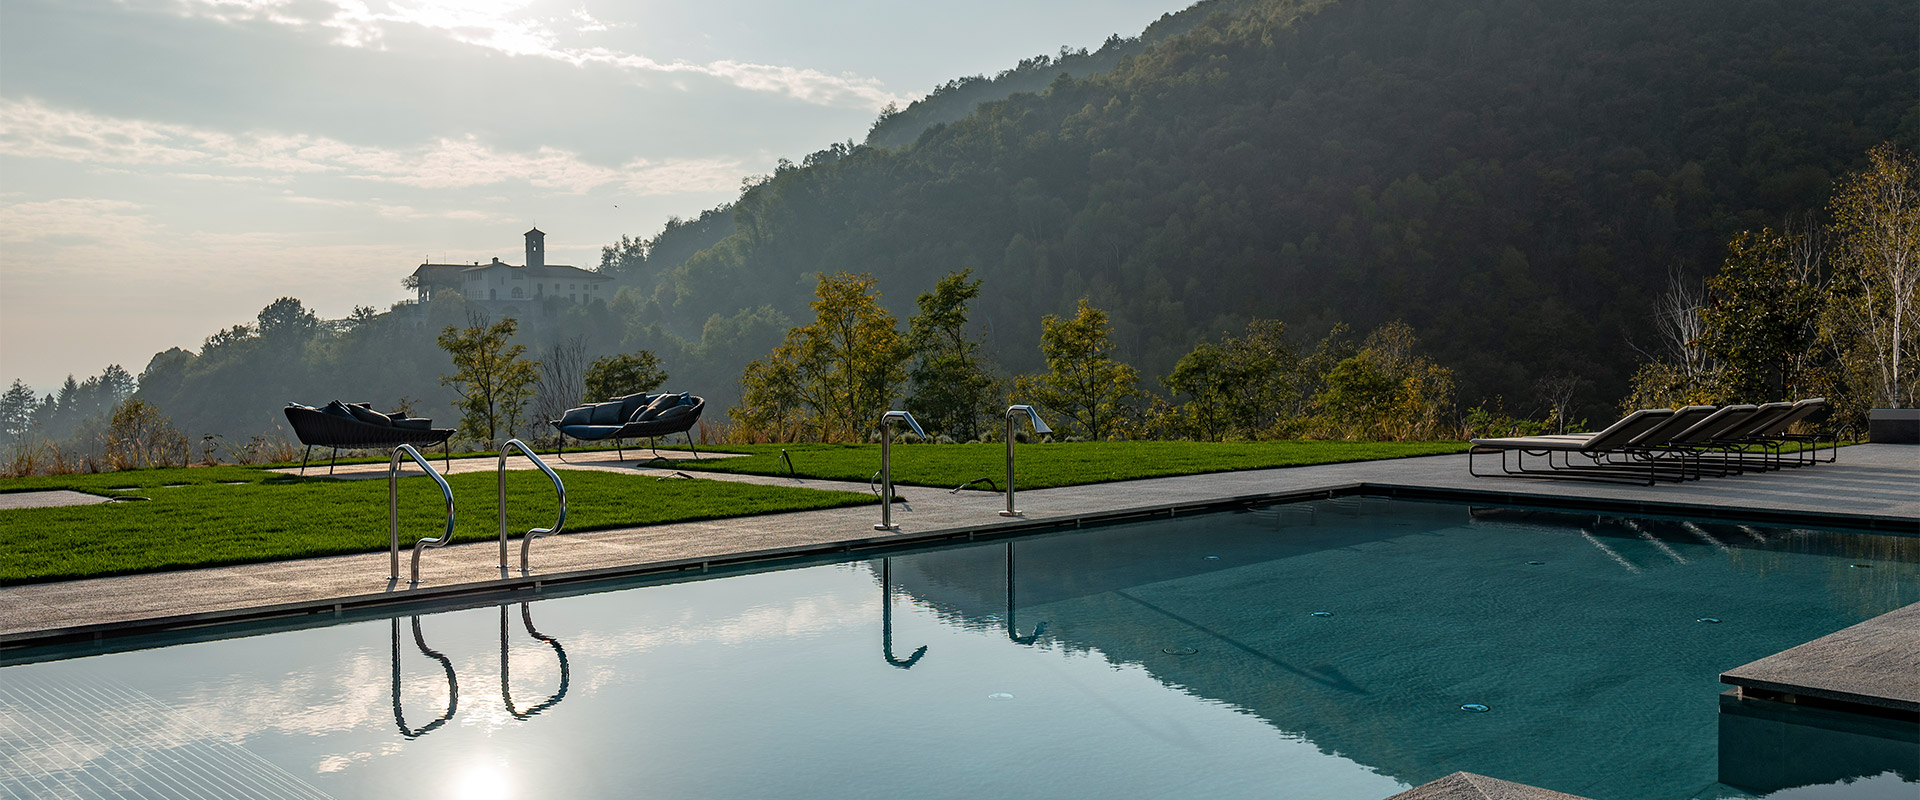 Fuga Benessere: Relaxing Nature con Private SPA & Dinner